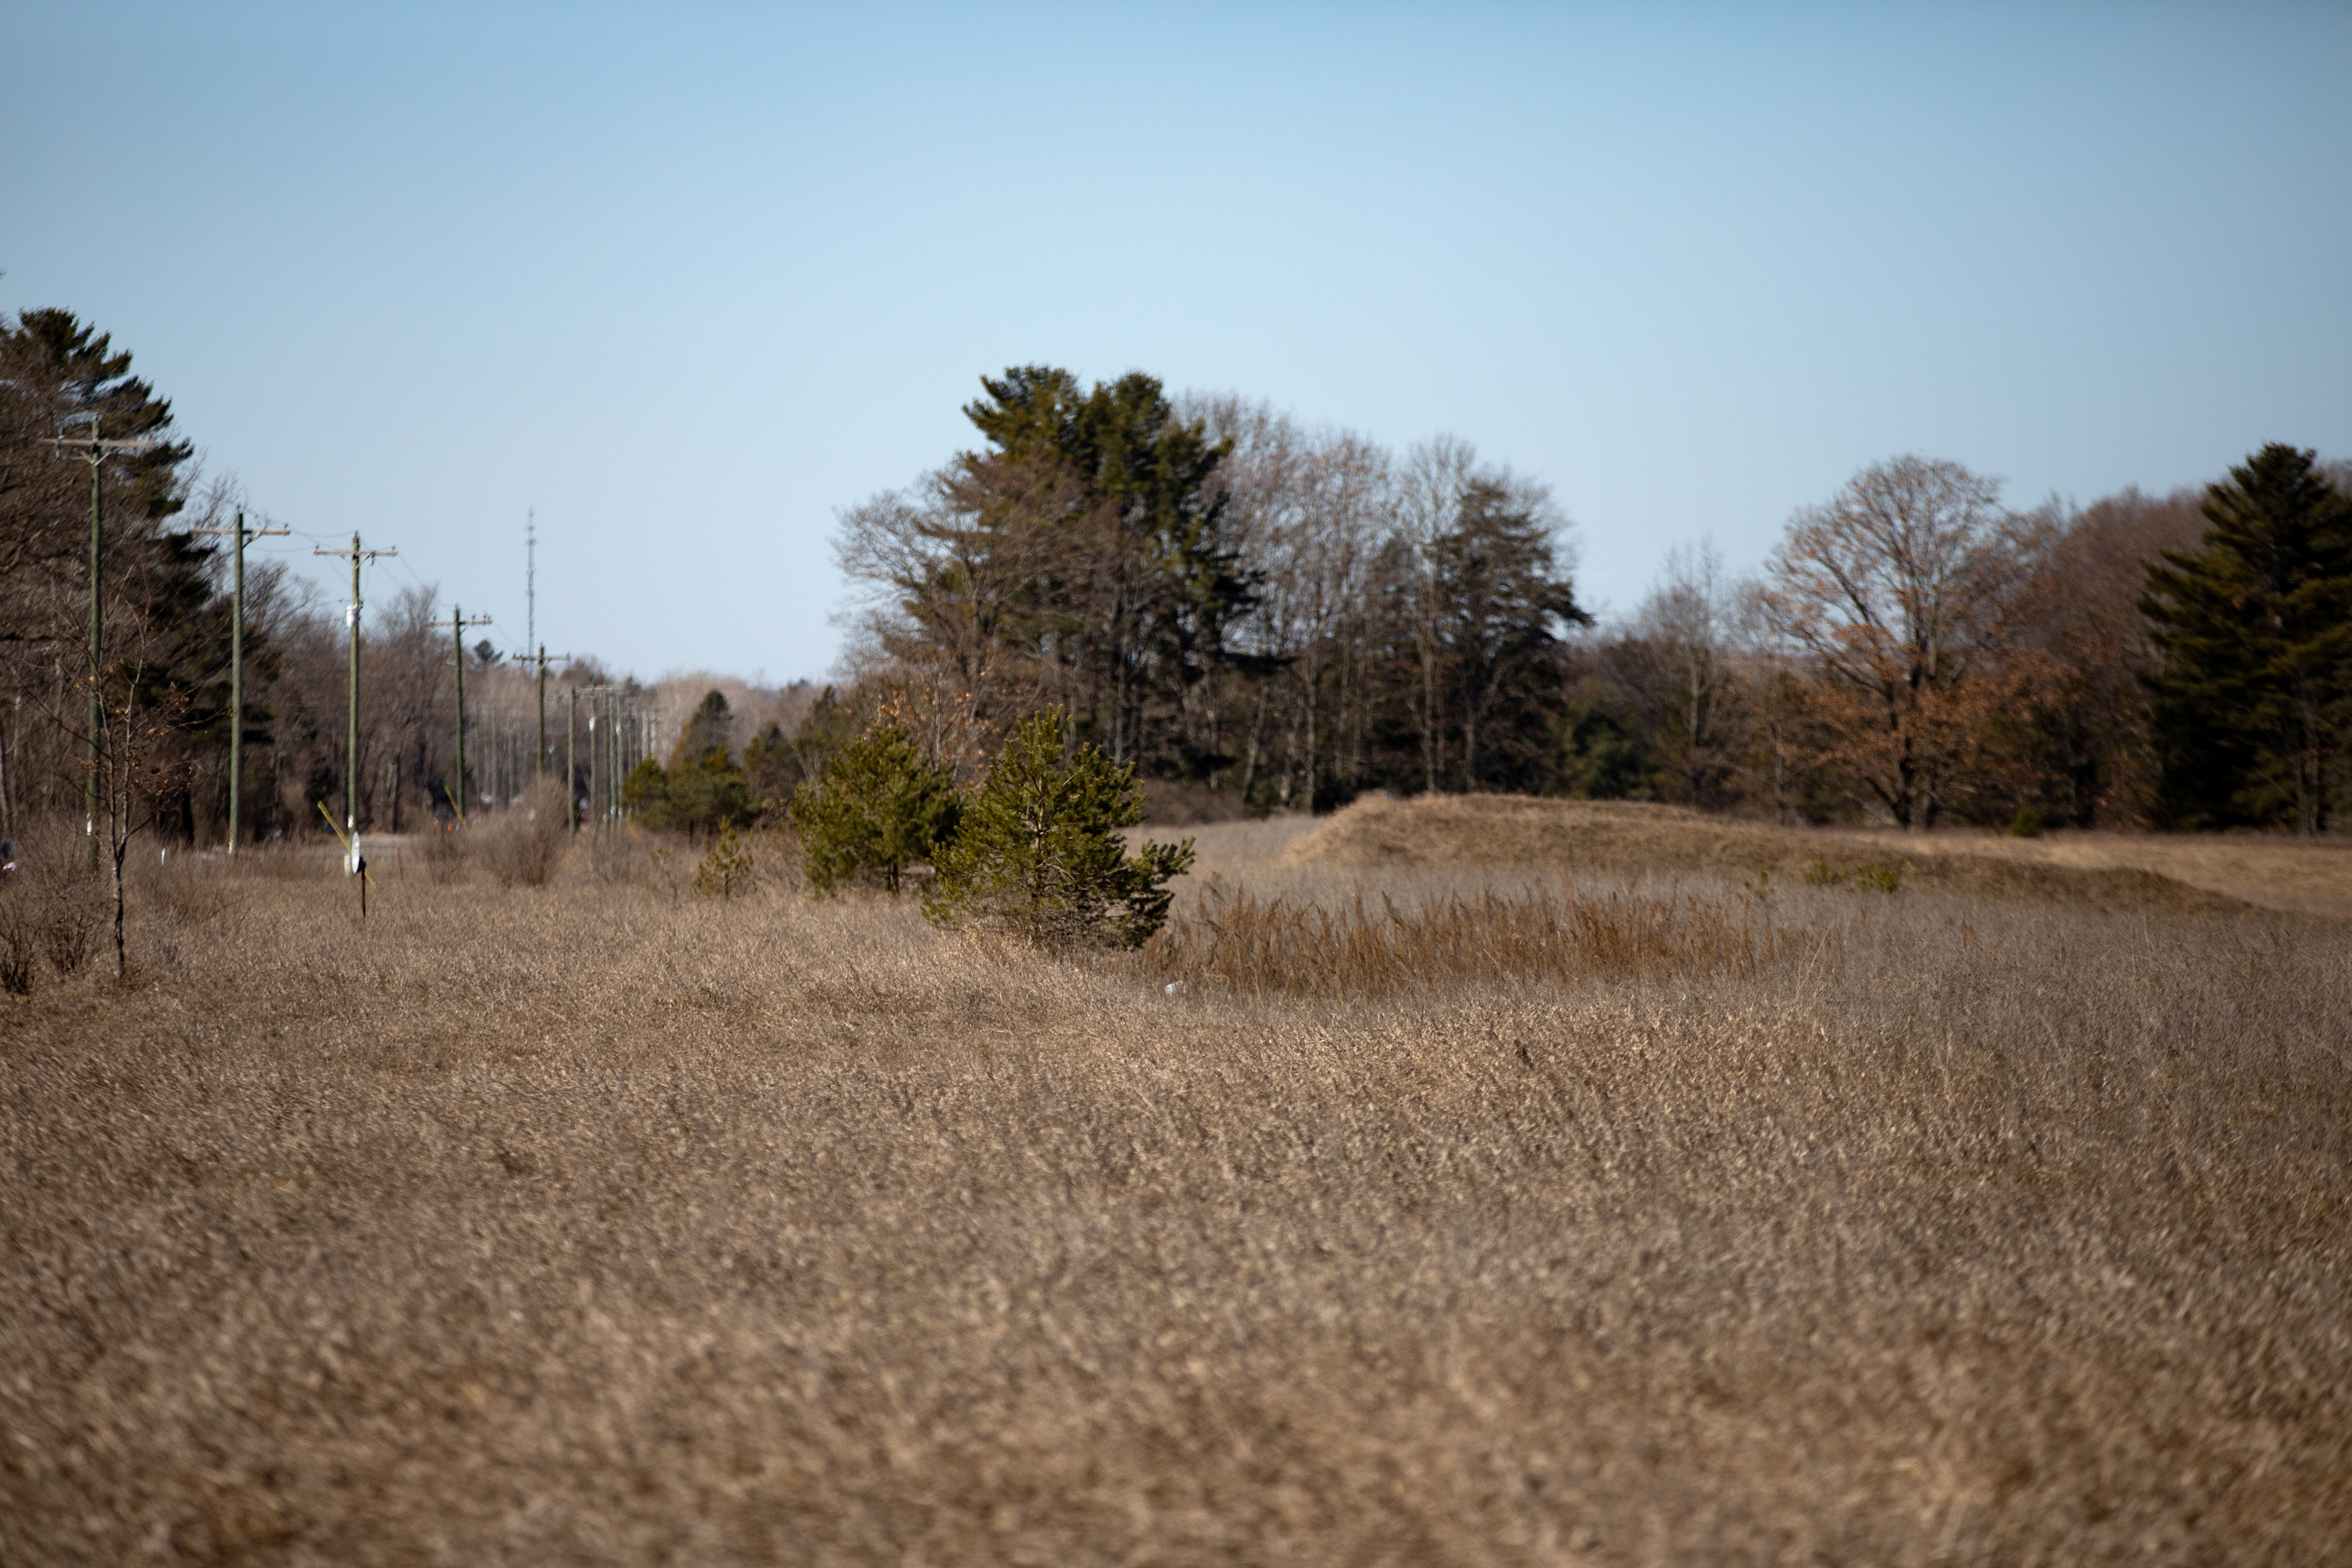 A piece of land that has a federal drilling lease issued for oil and gas development is seen in Mecosta County, Michigan, U.S., March 20, 2021. Picture taken March 20, 2021.  REUTERS/Emily Elconin